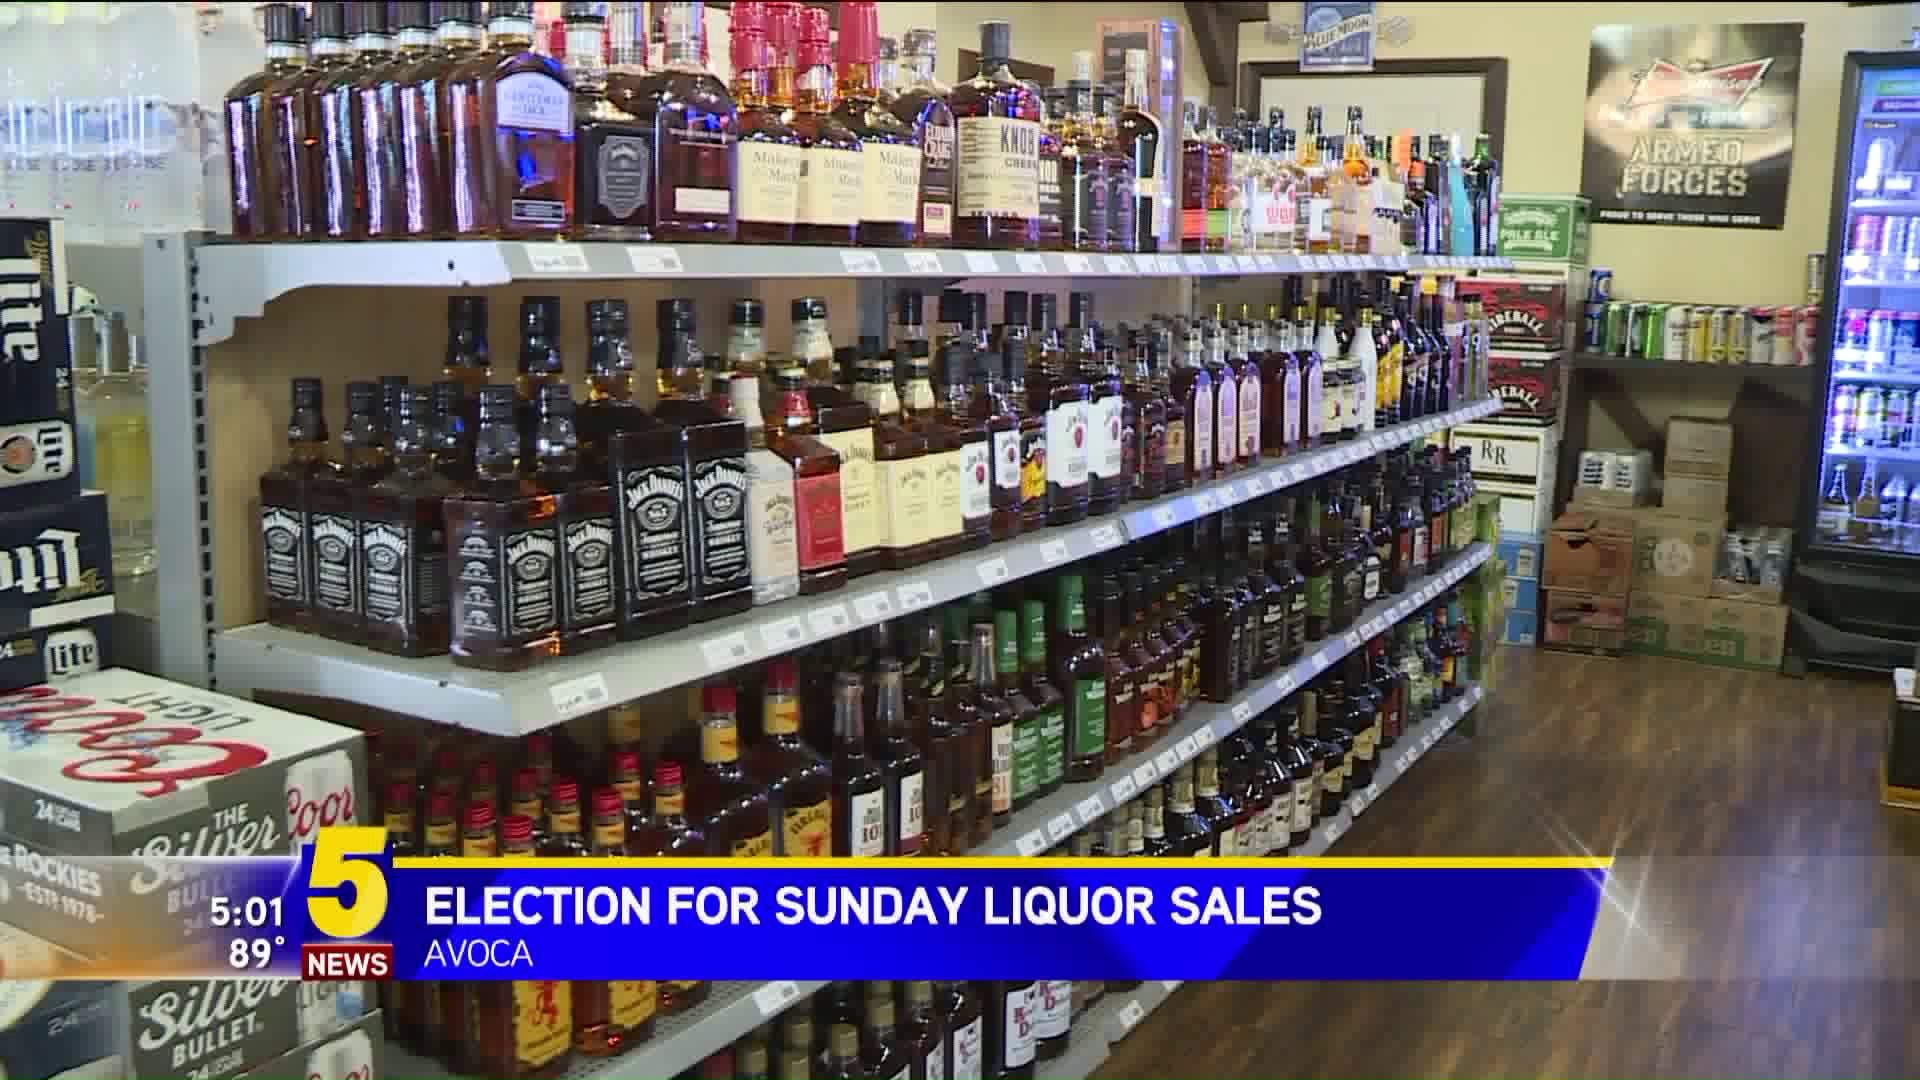 ELECTION FOR SUNDAY LIQUOR SALES IN AVOCA